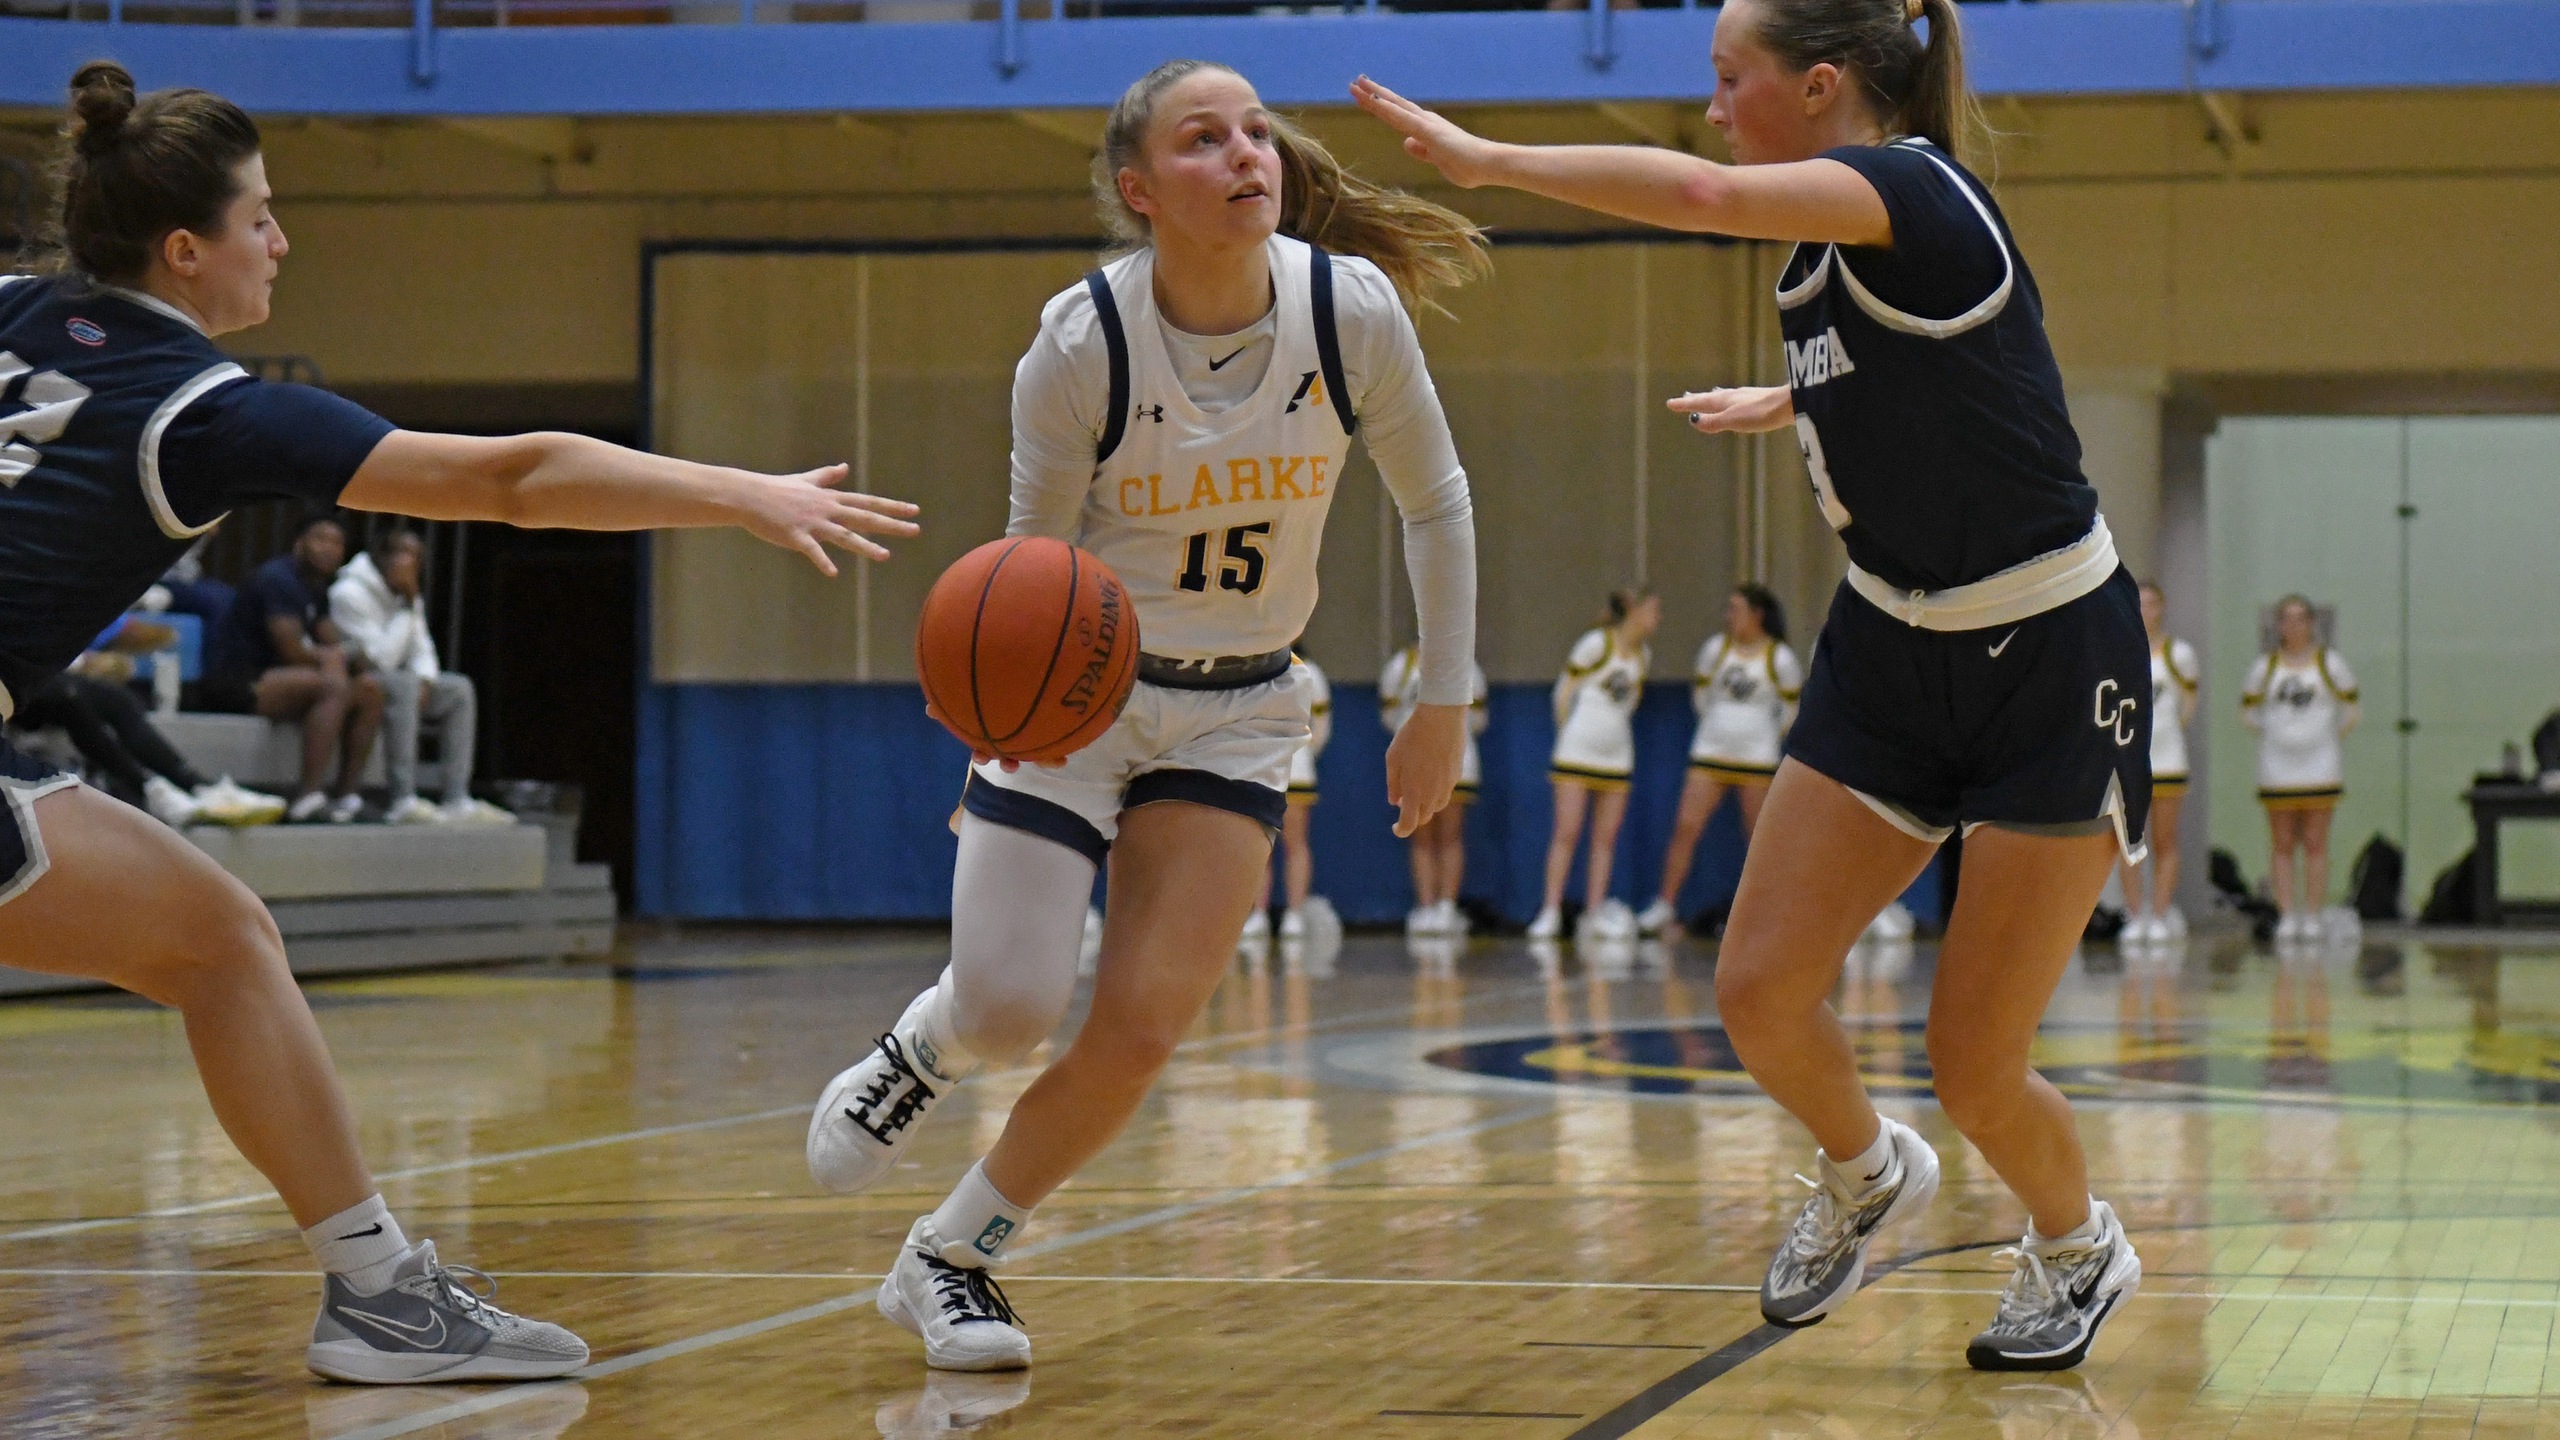 Pride's defense steps up in 65-59 win against Columbia College